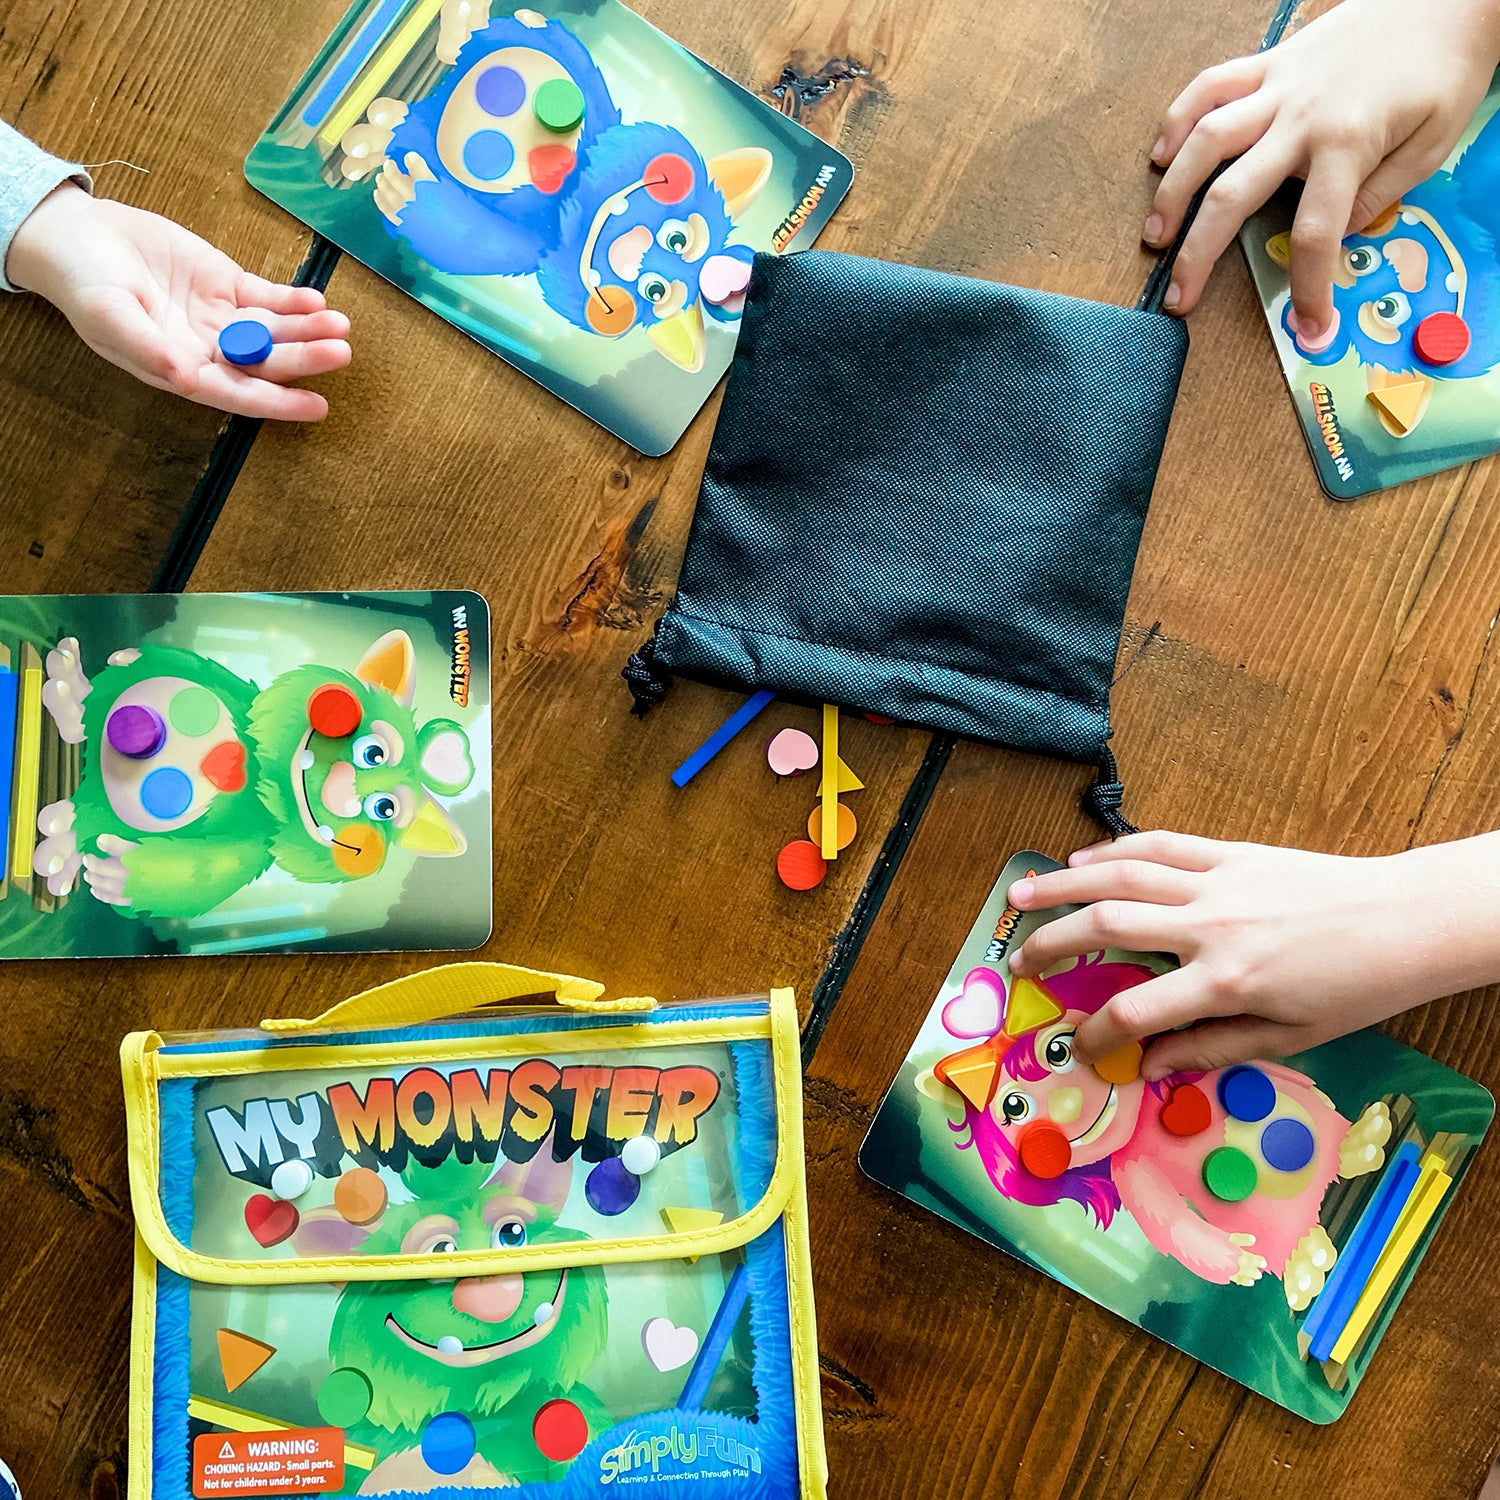 My Monster by SimplyFun is a probability game that focuses on tactile skills.